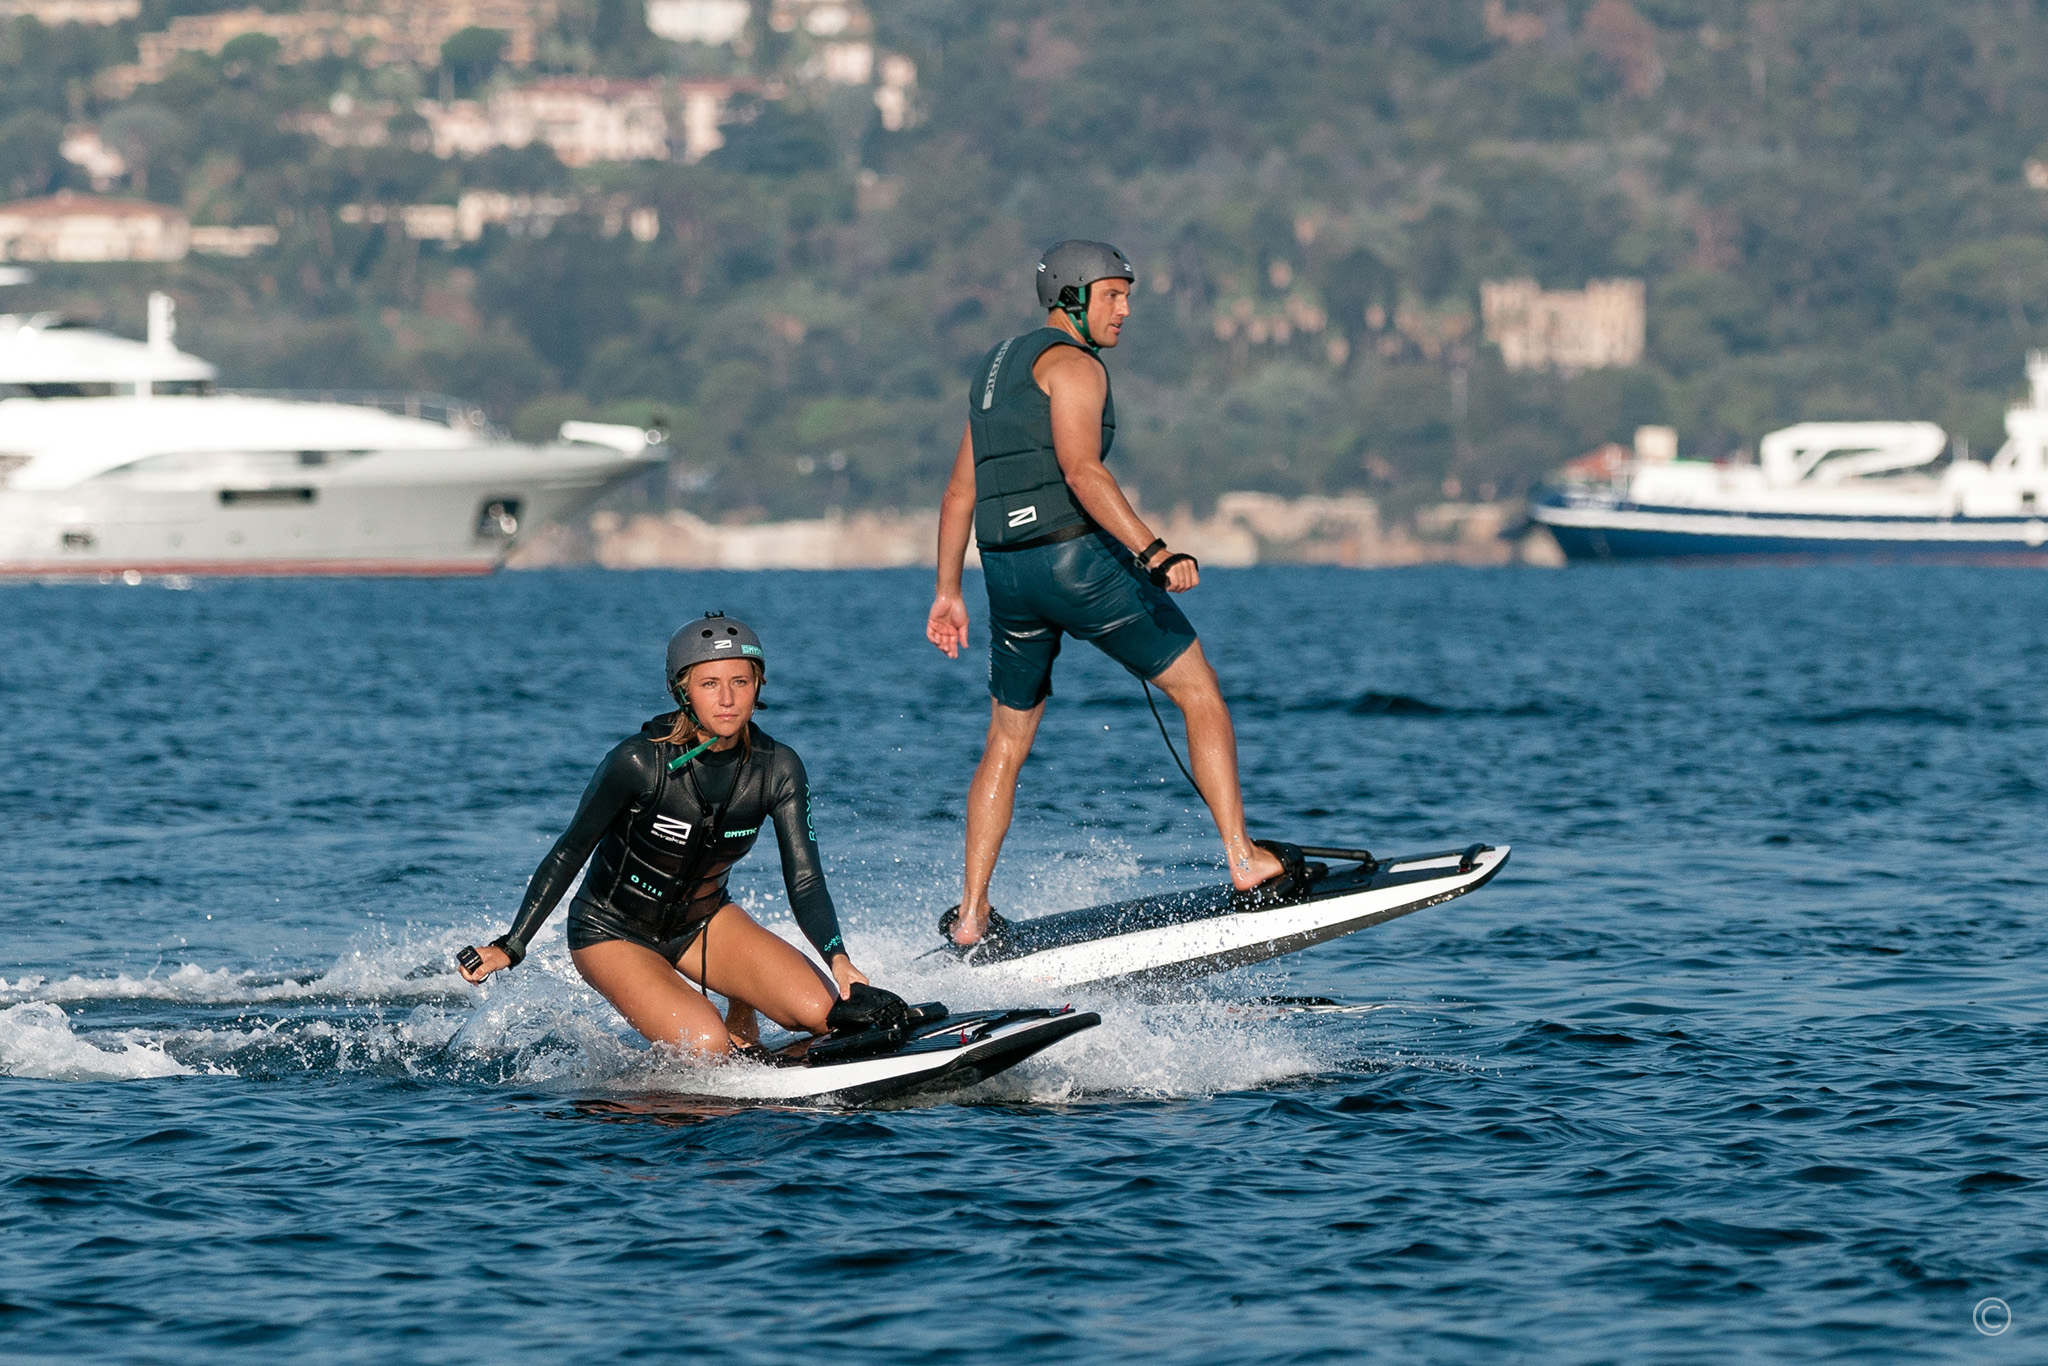 electric surfboard on a yacht charter